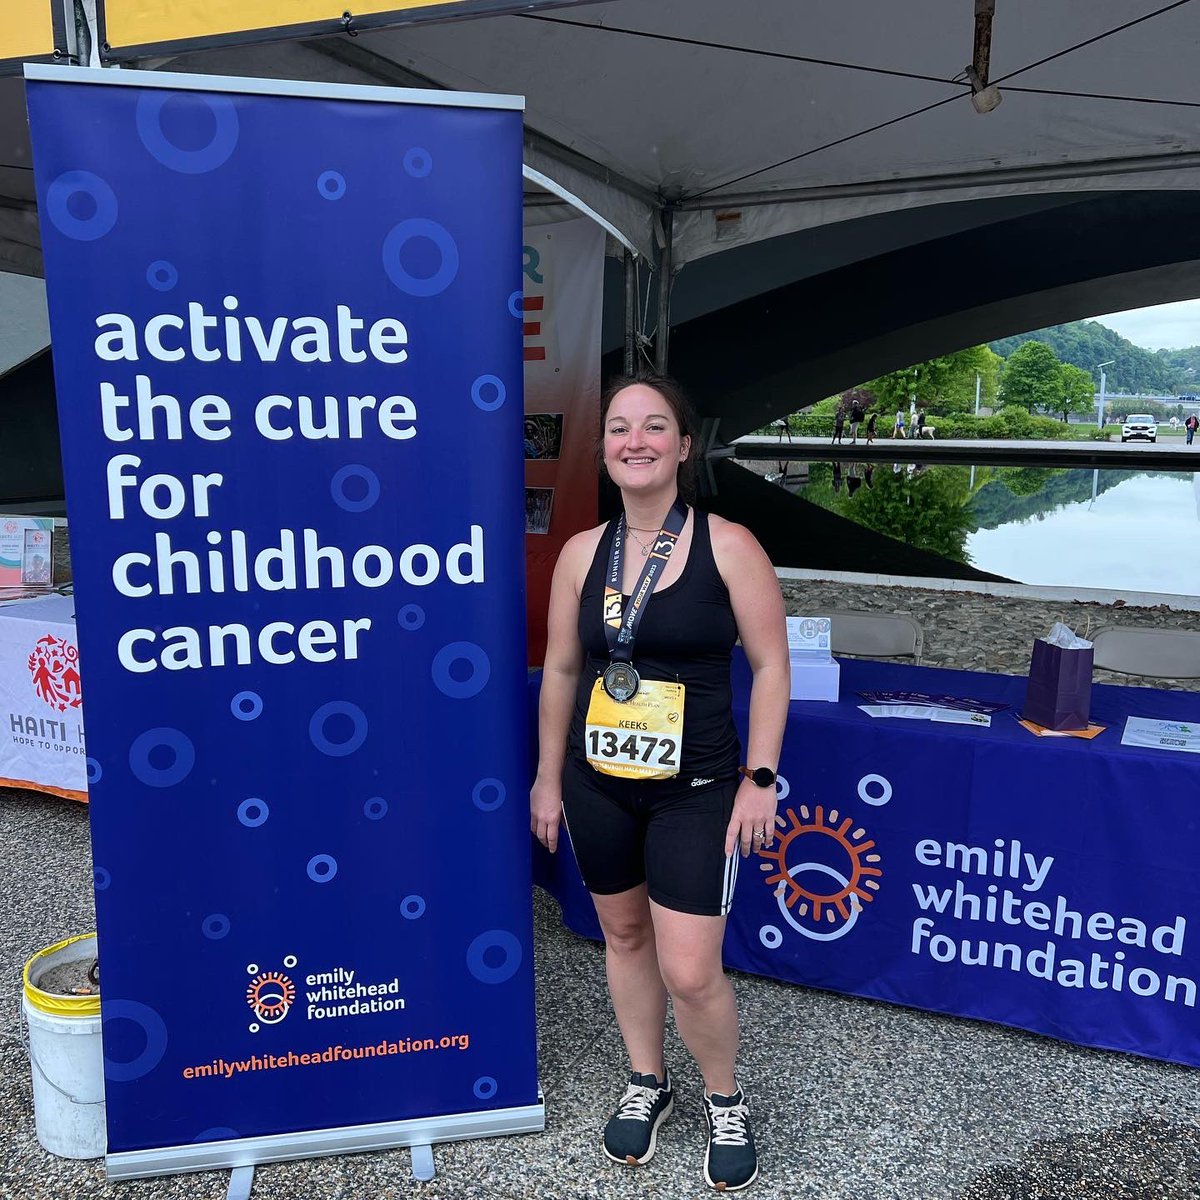 This #MEDALMONDAY 🏅 we are celebrating our 2023 @PGHMarathon Team EWF runners! Thank you for getting active with us this weekend to #activatethecure for childhood cancer. Ps. It’s not too late to support our runners overall fundraising goal! bit.ly/ewf-pgh23